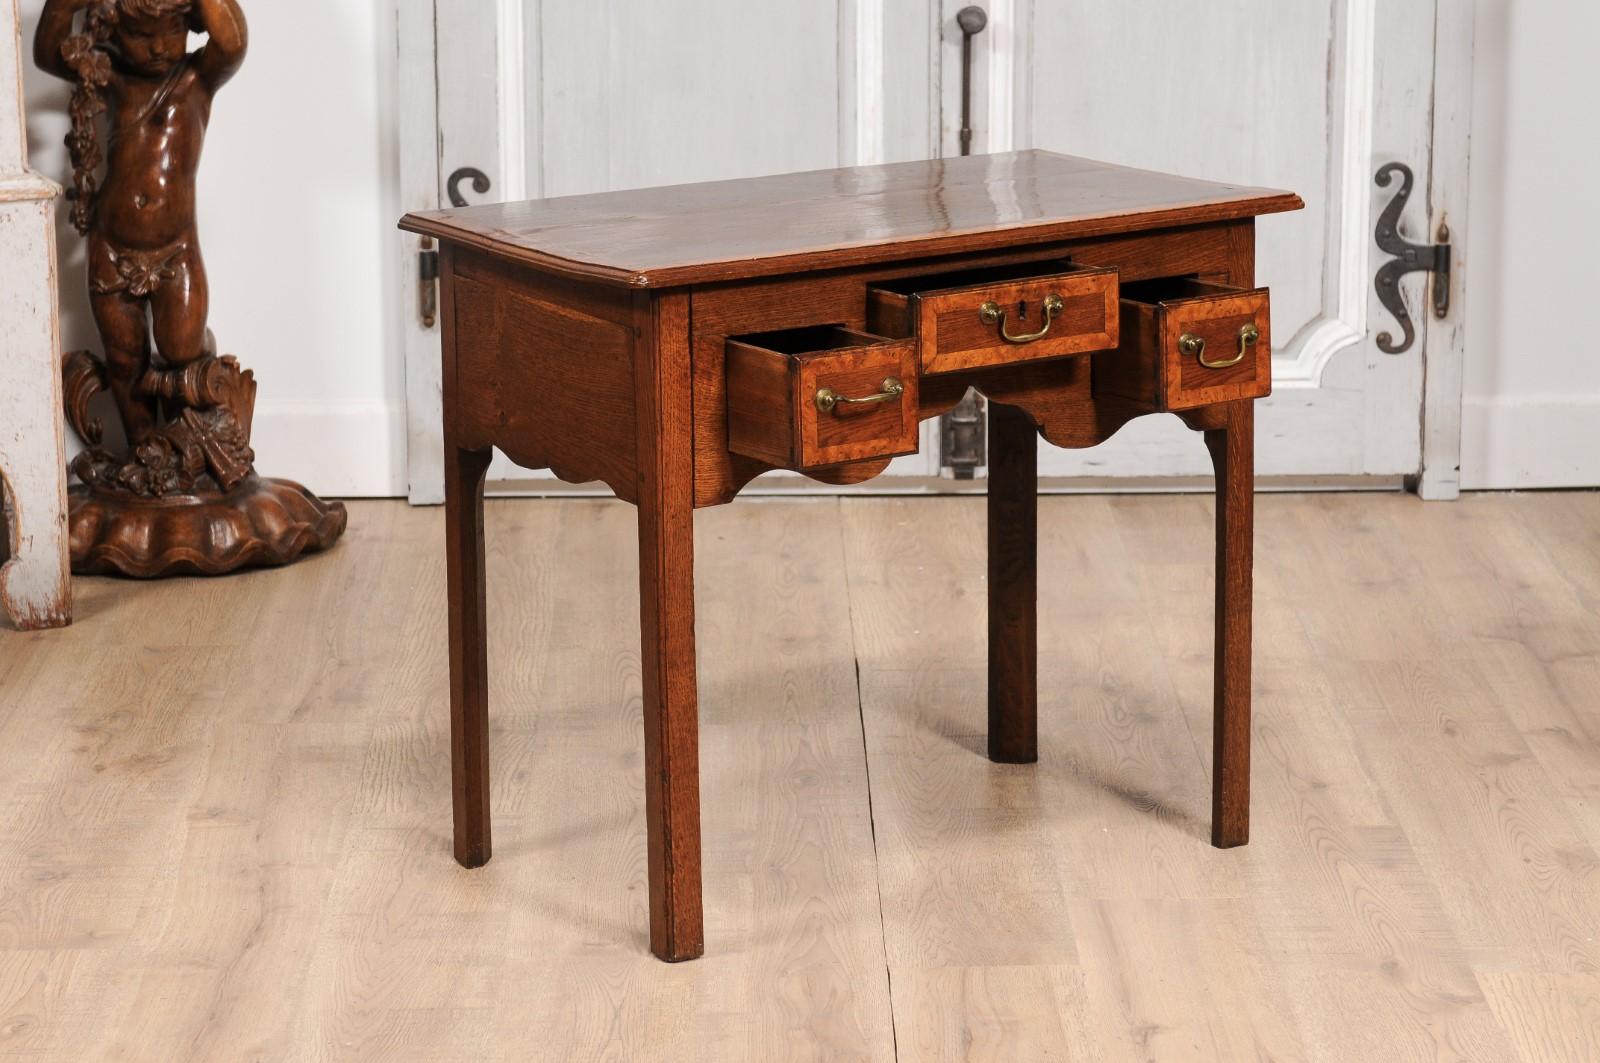 English Georgian Period 18th Century Oak Lowboy Side Table with Carved Apron 2